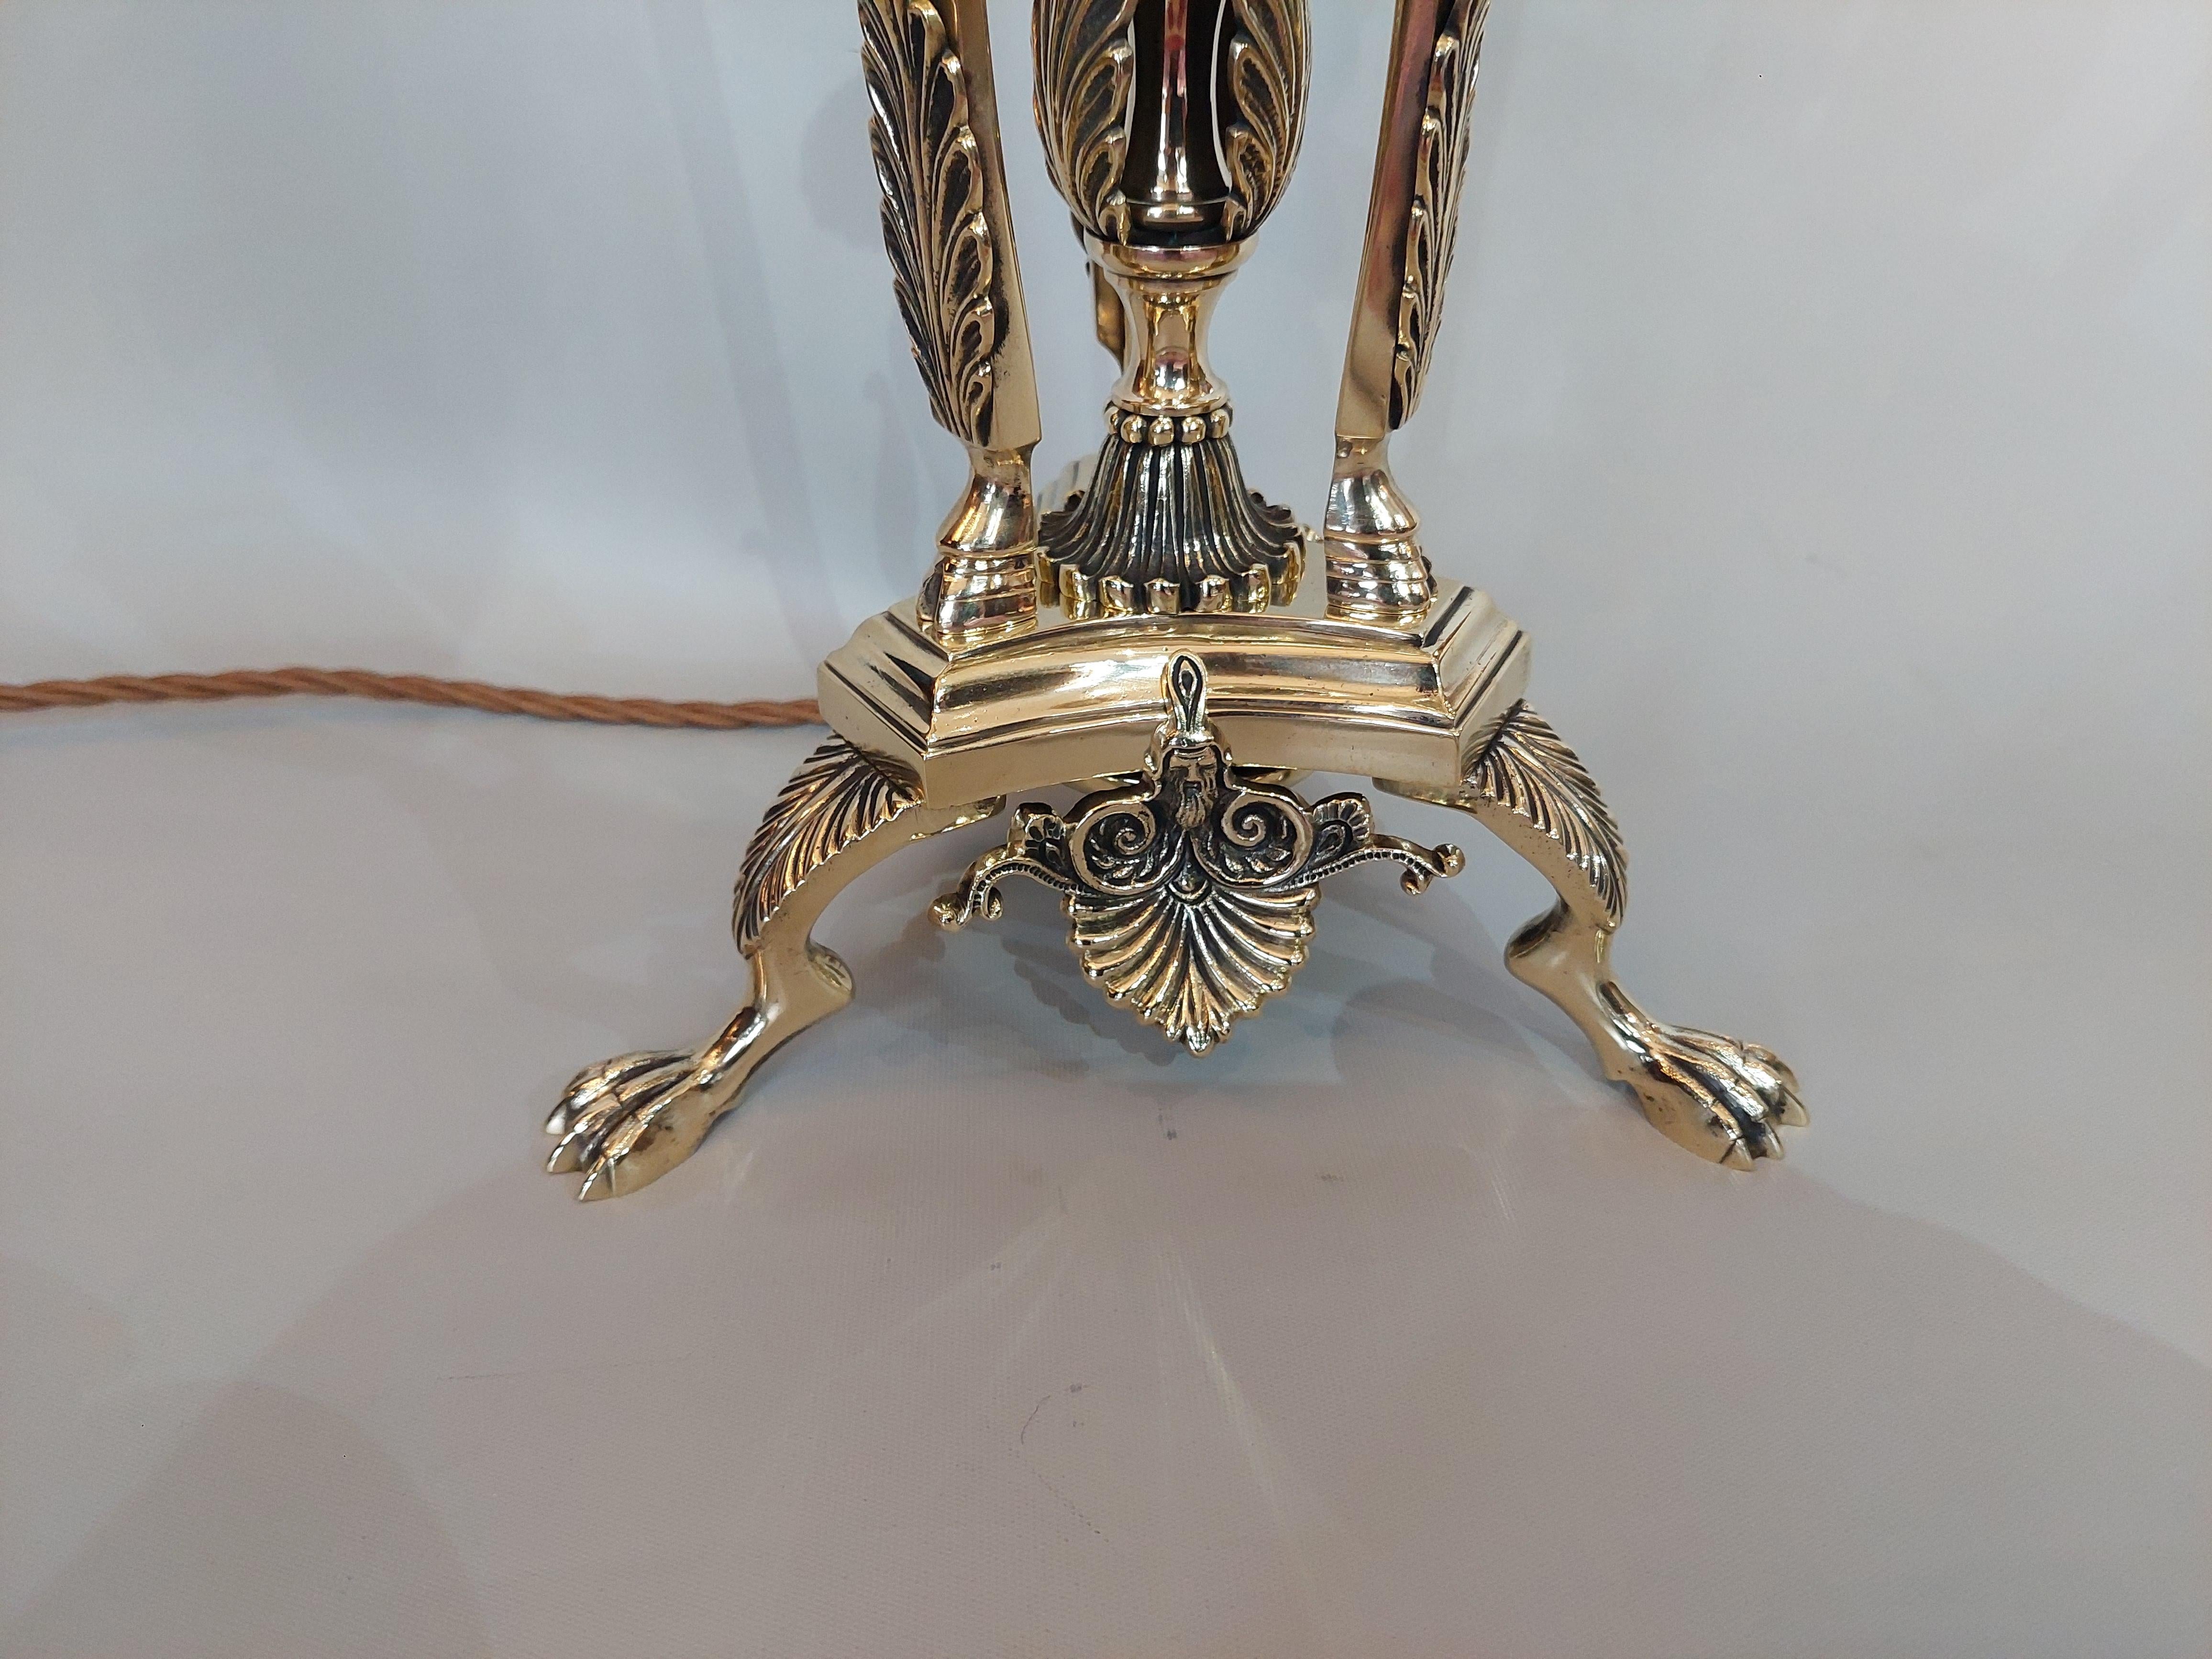 Early 20thC Brass Light Fitting, inverted tapering column decorated with applied stags heads, acanthus leaves, anthemion, and a figure of Minerva along with other classical motifs, raised on paw feet - 14